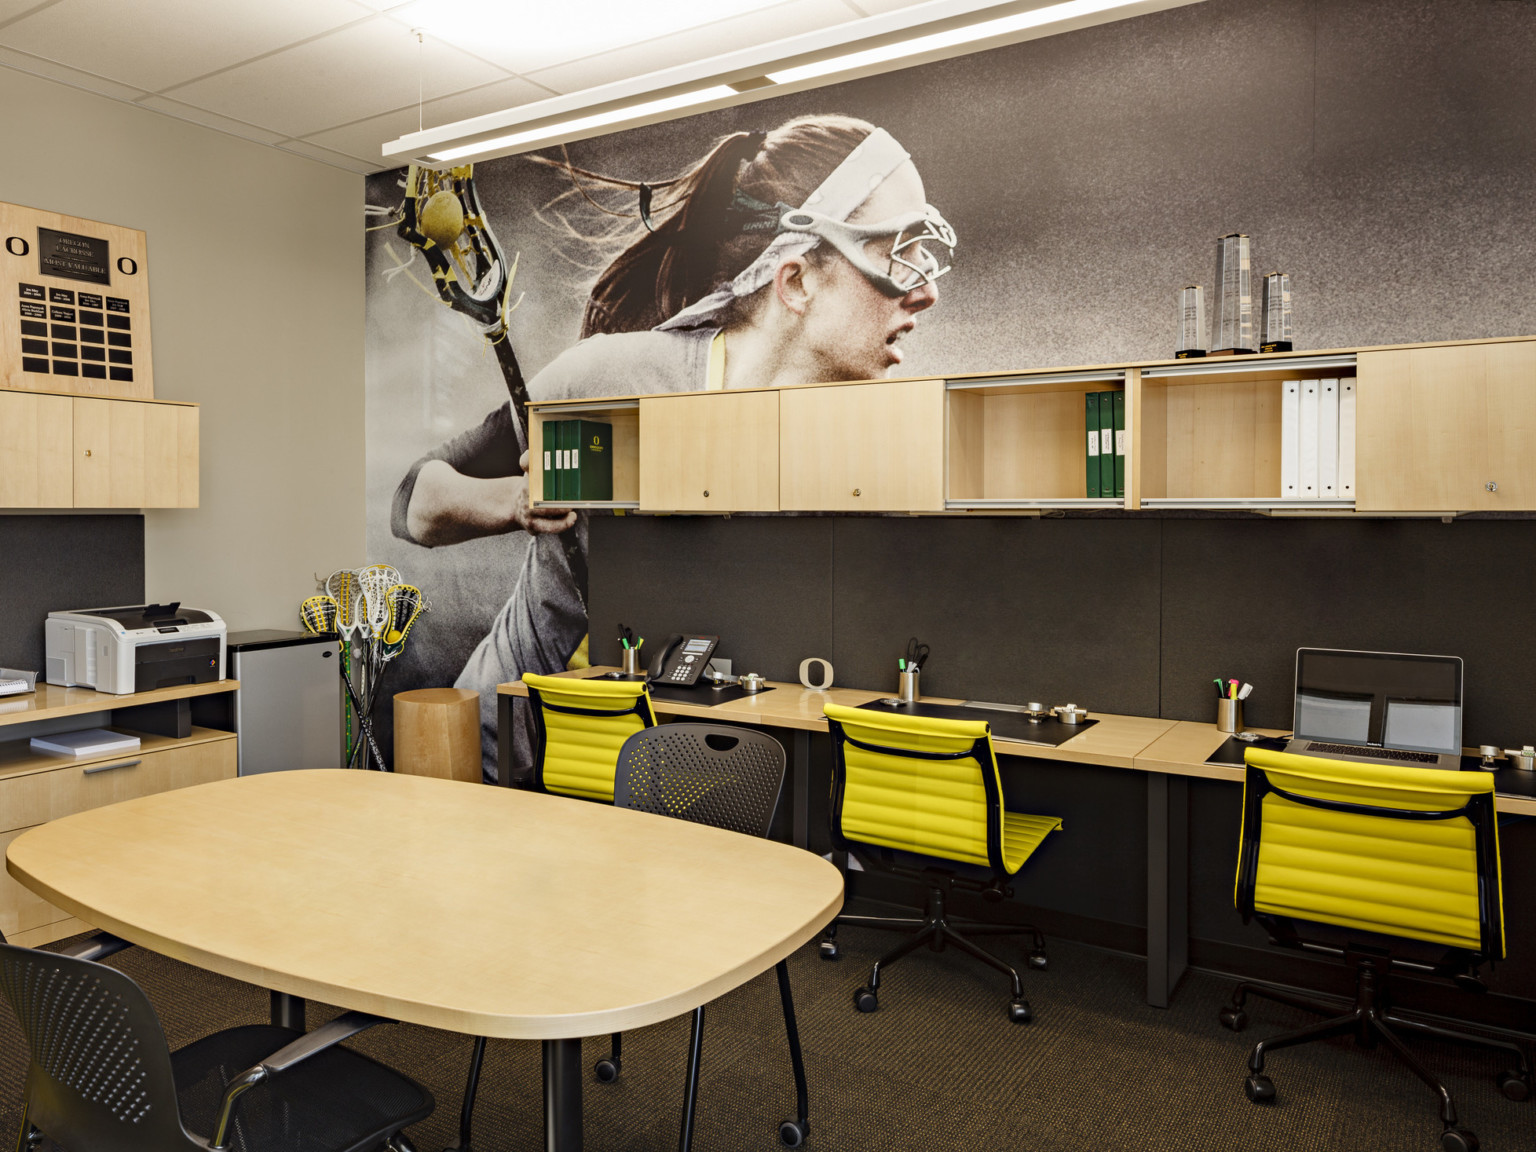 Room with lacrosse player photo mural on right wall. Flexible workstations along both walls, wood counters and cabinets, table